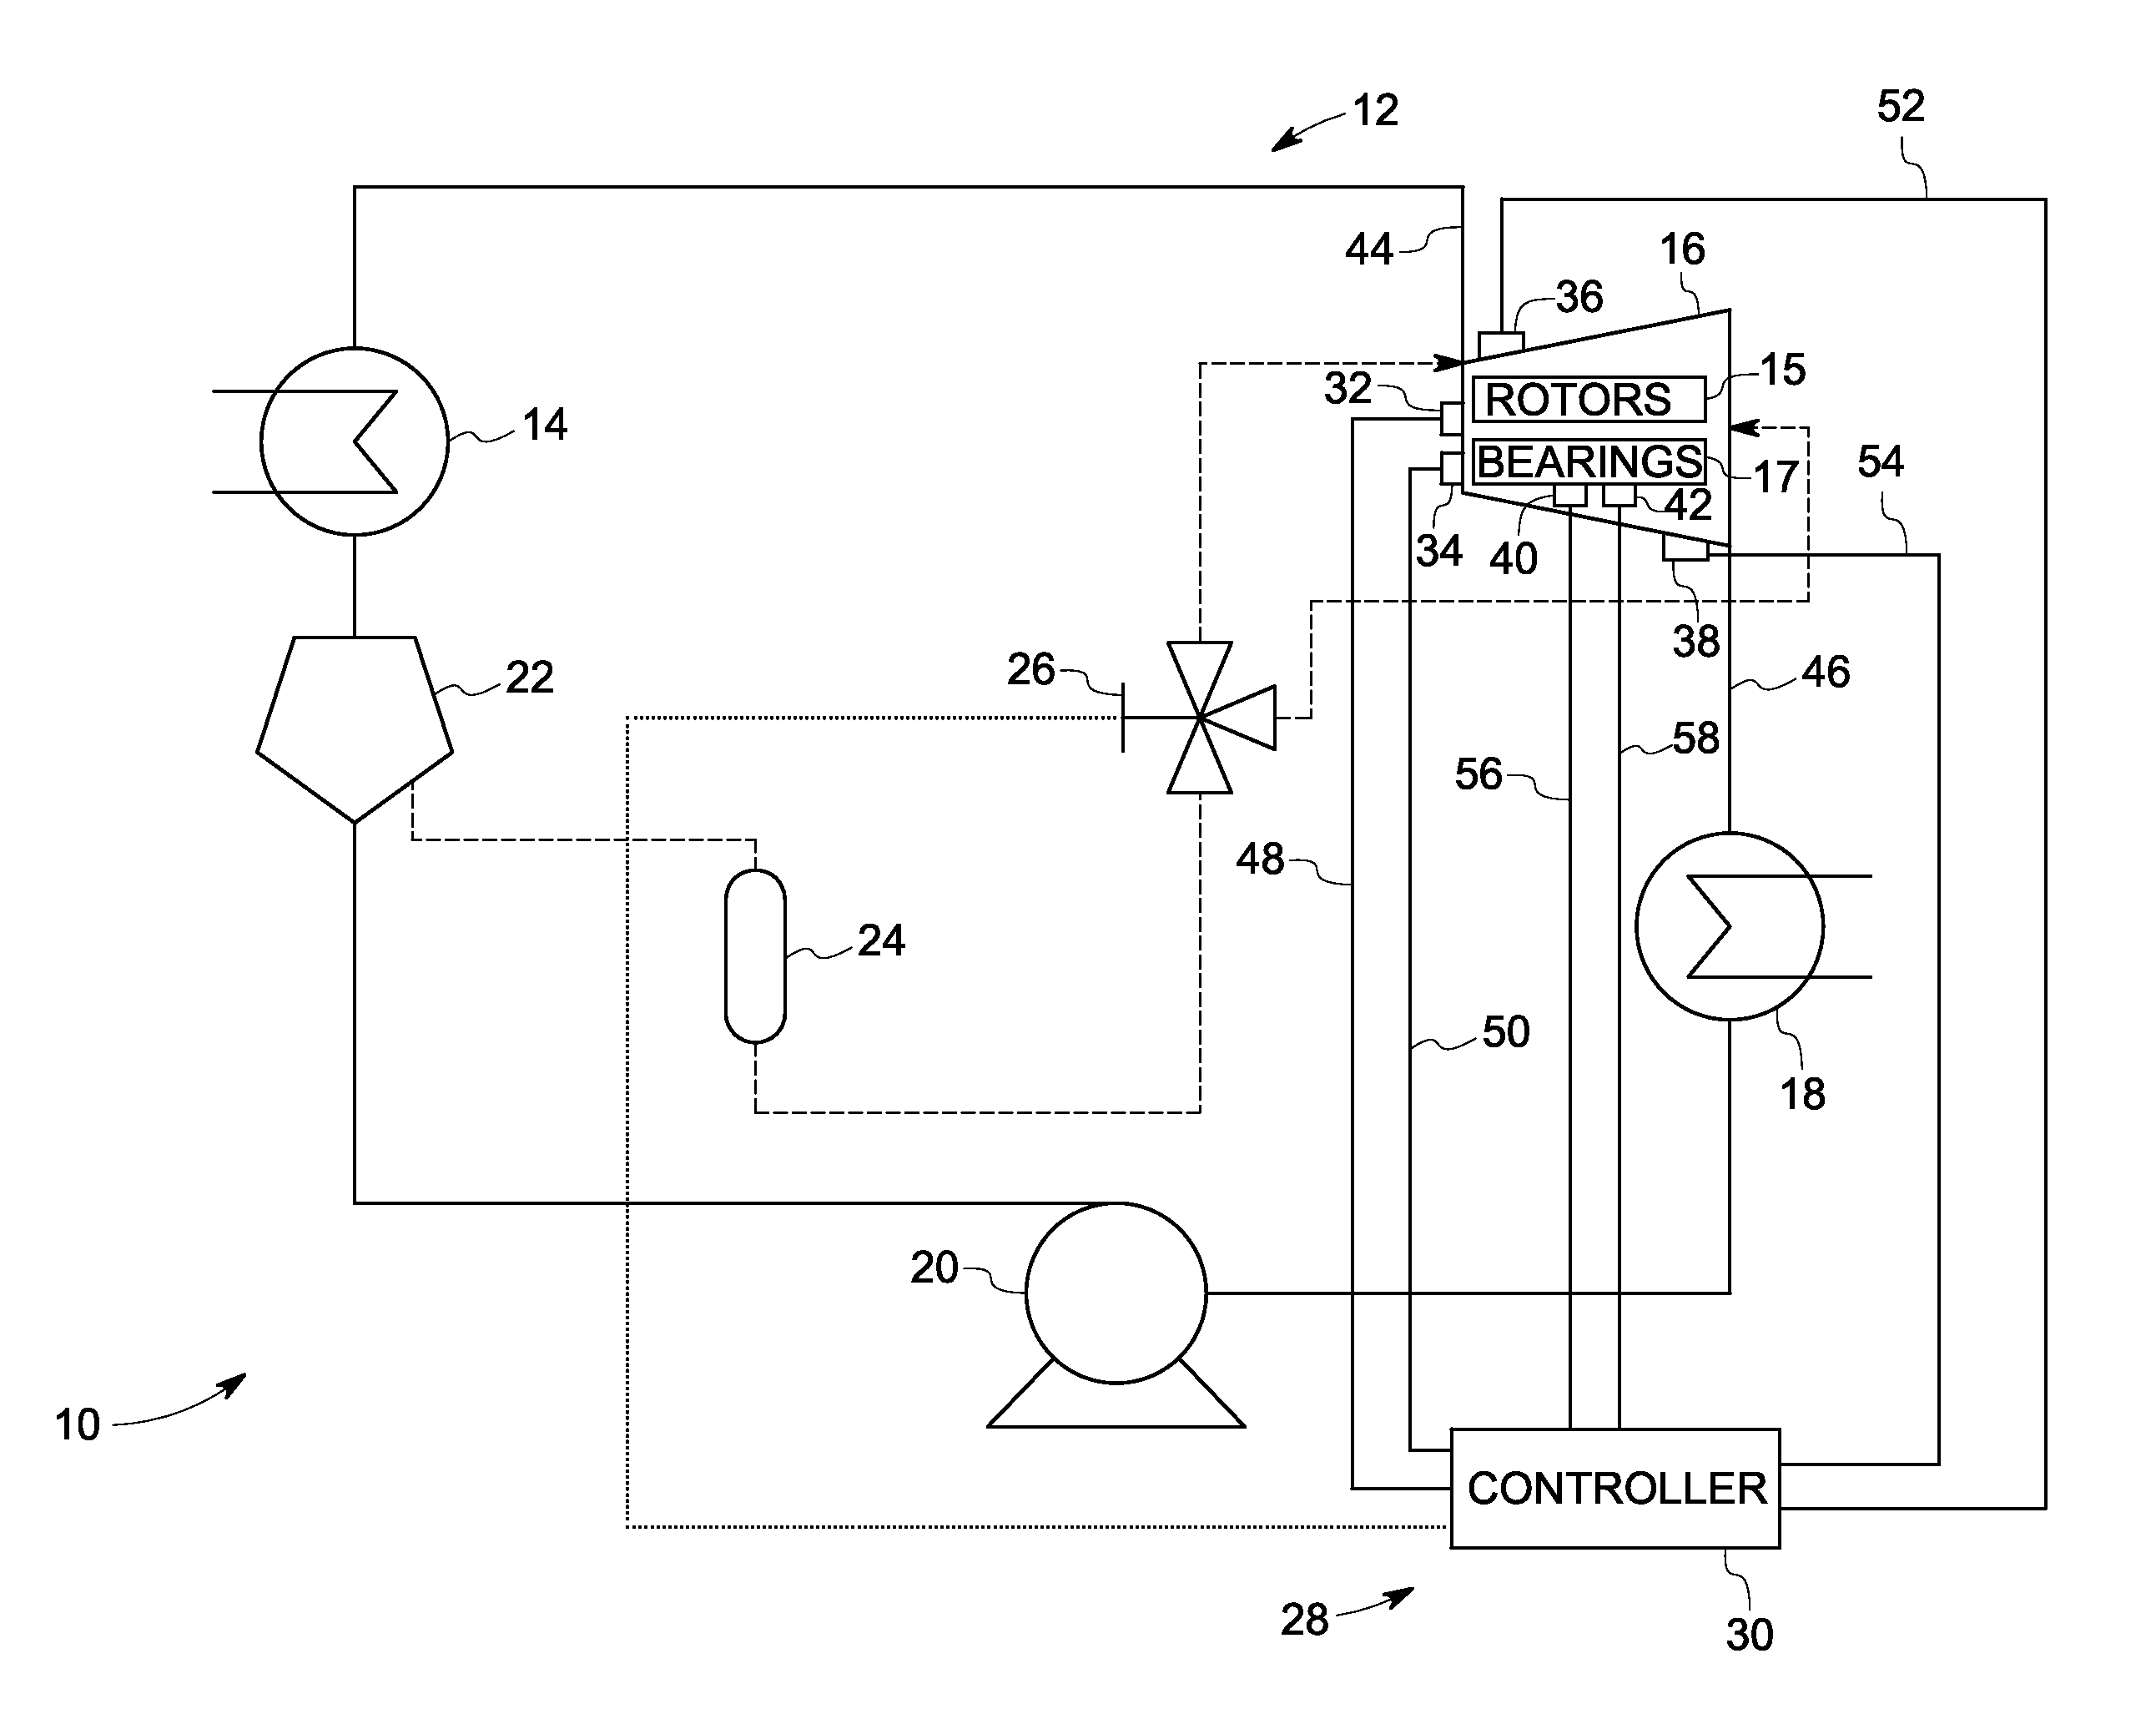 Method for lubricating screw expanders and system for controlling lubrication